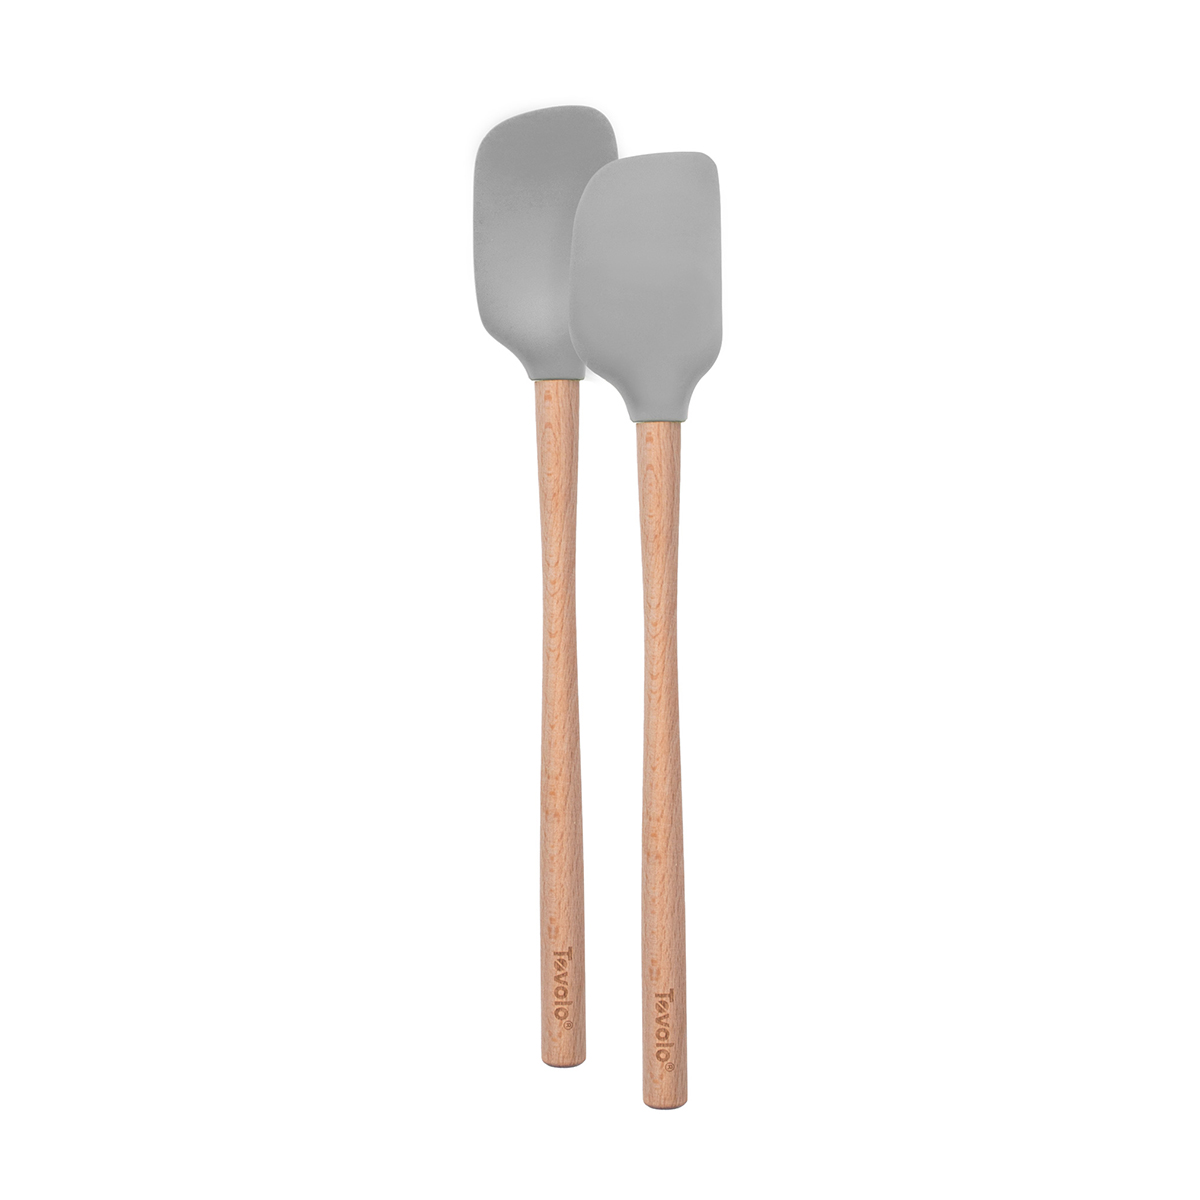 https://www.containerstore.com/catalogimages/423669/10086202-Flex-Core-Wood-Handled-S2-M.jpg